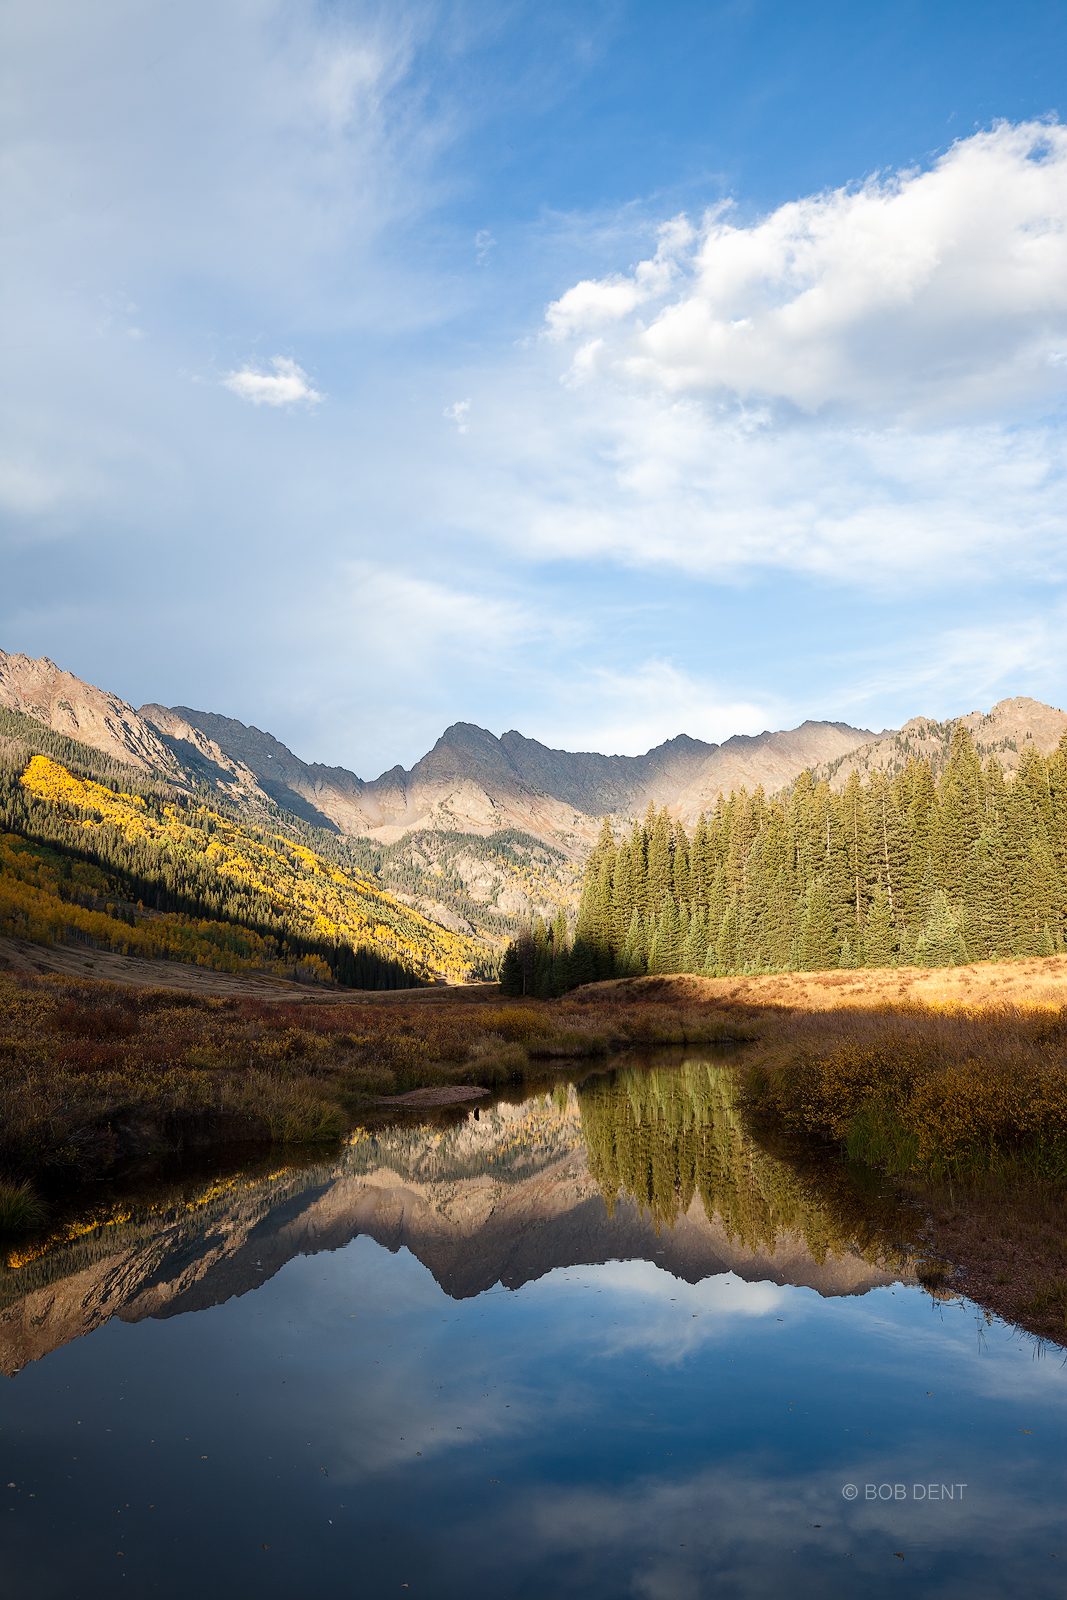 The Gore Range reflects in Piney River, White River National Forest.